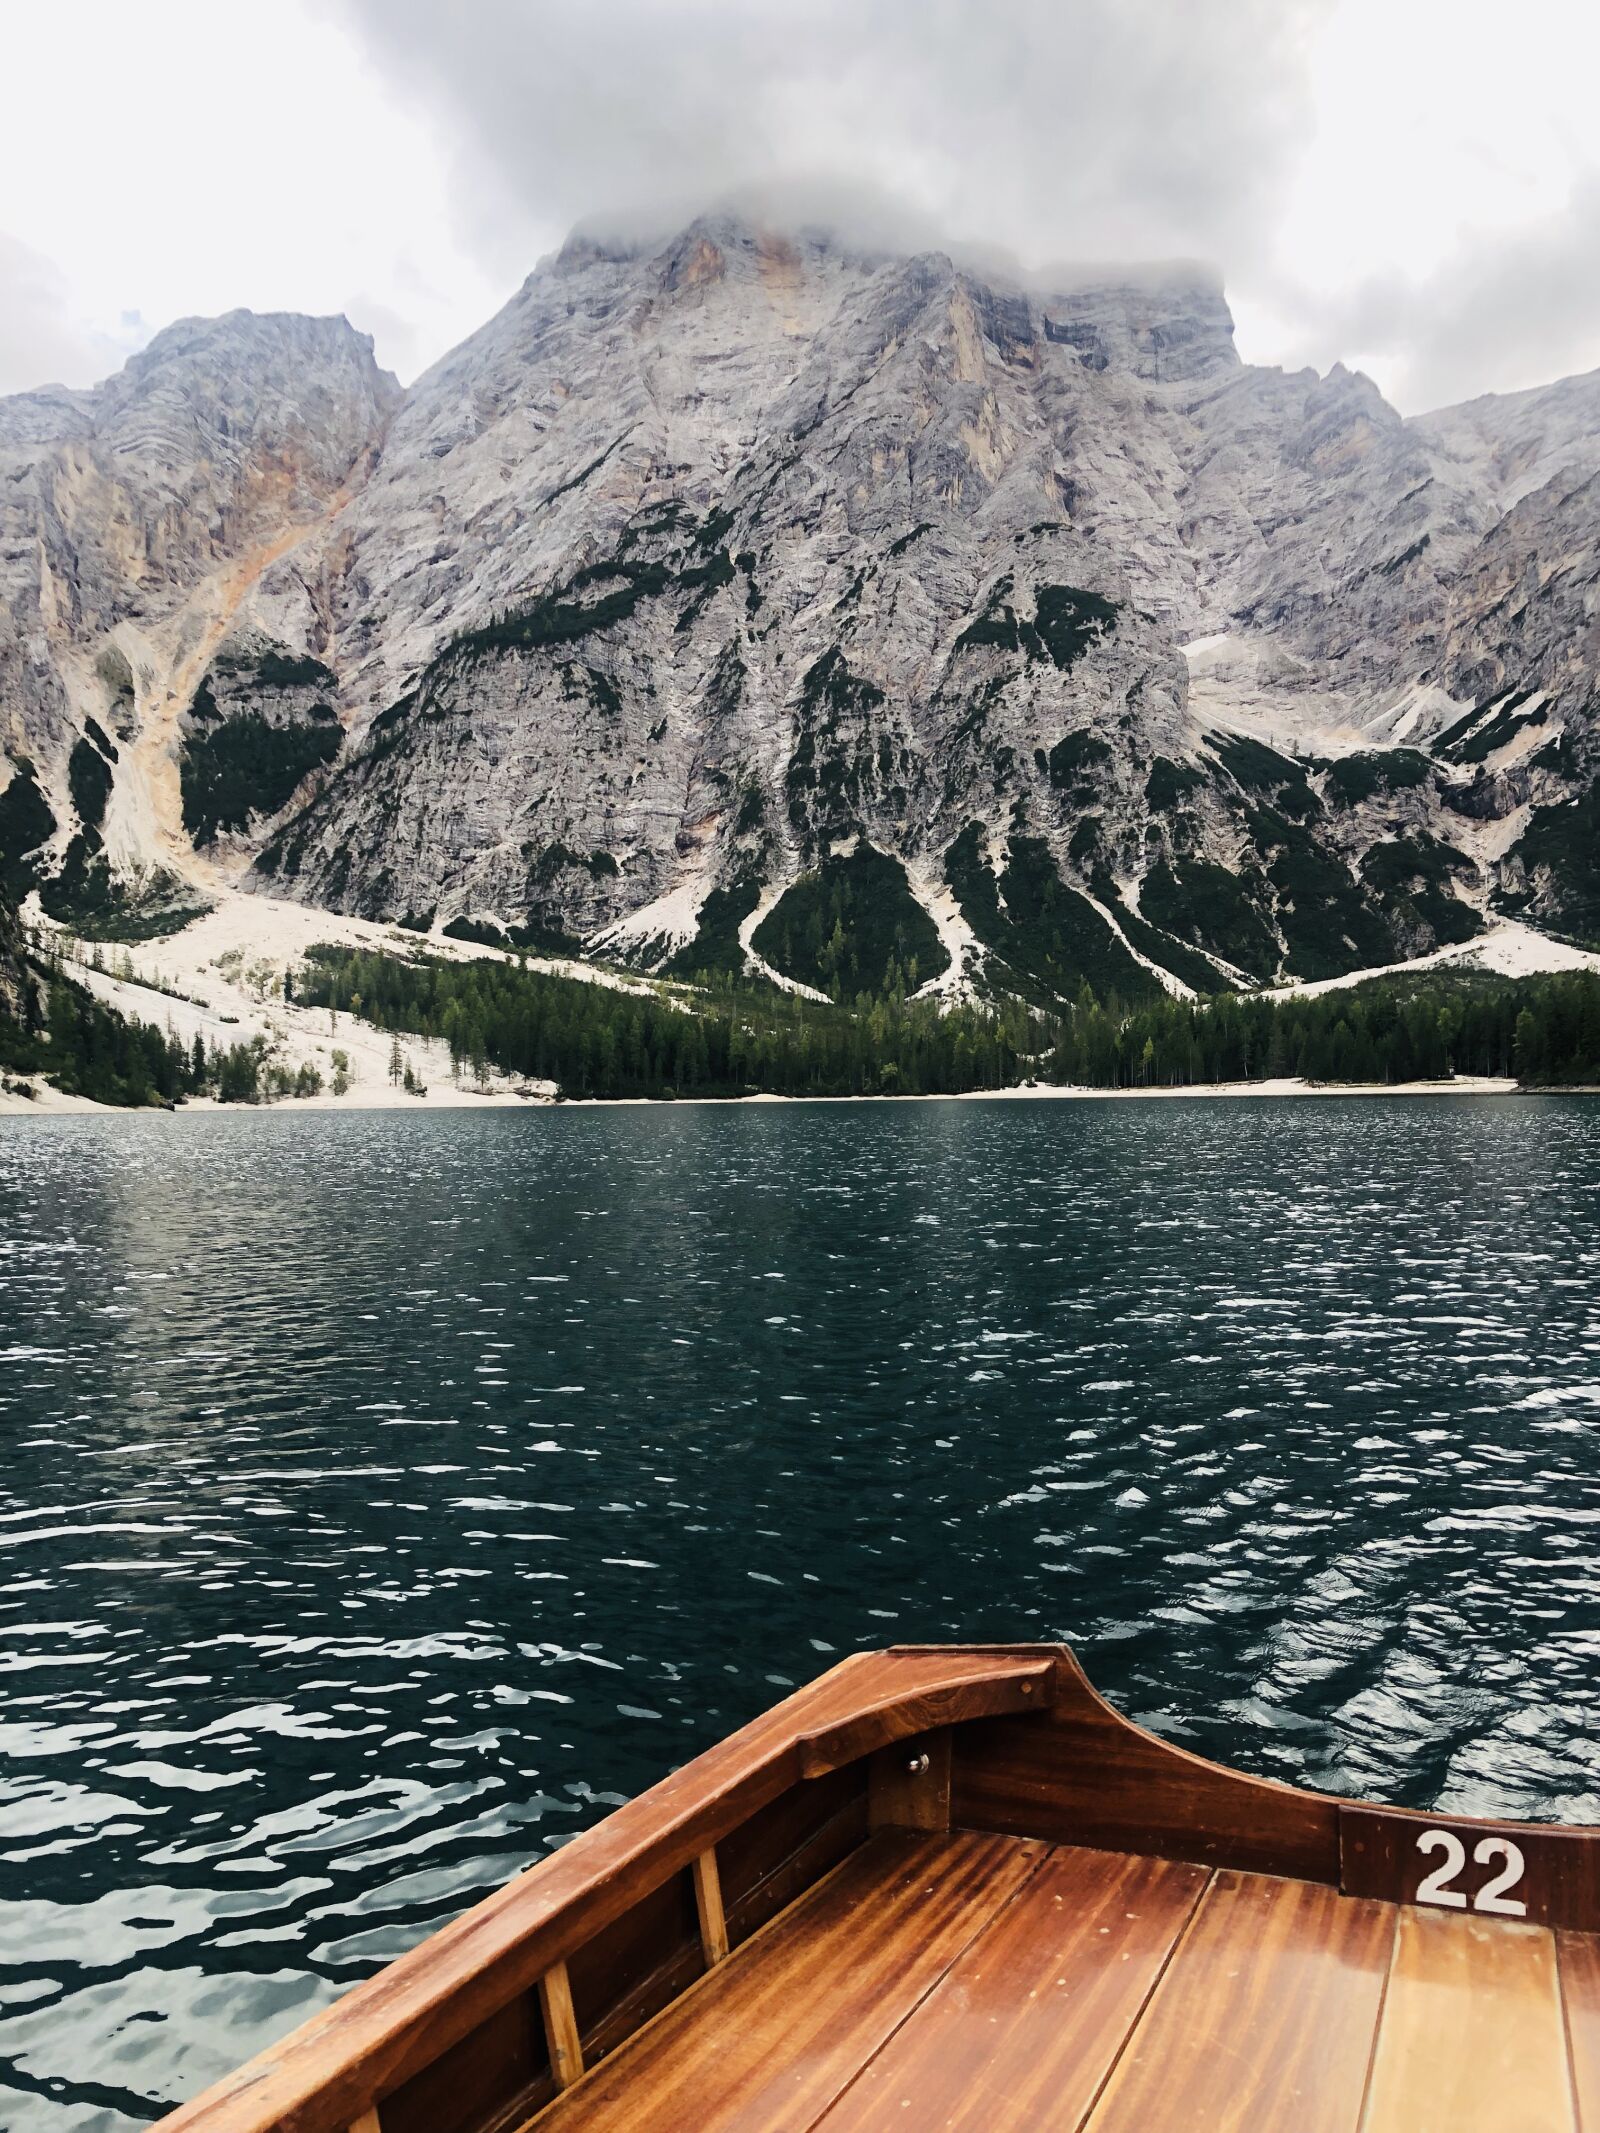 Apple iPhone 8 Plus sample photo. Dolomites, south tyrol, italy photography